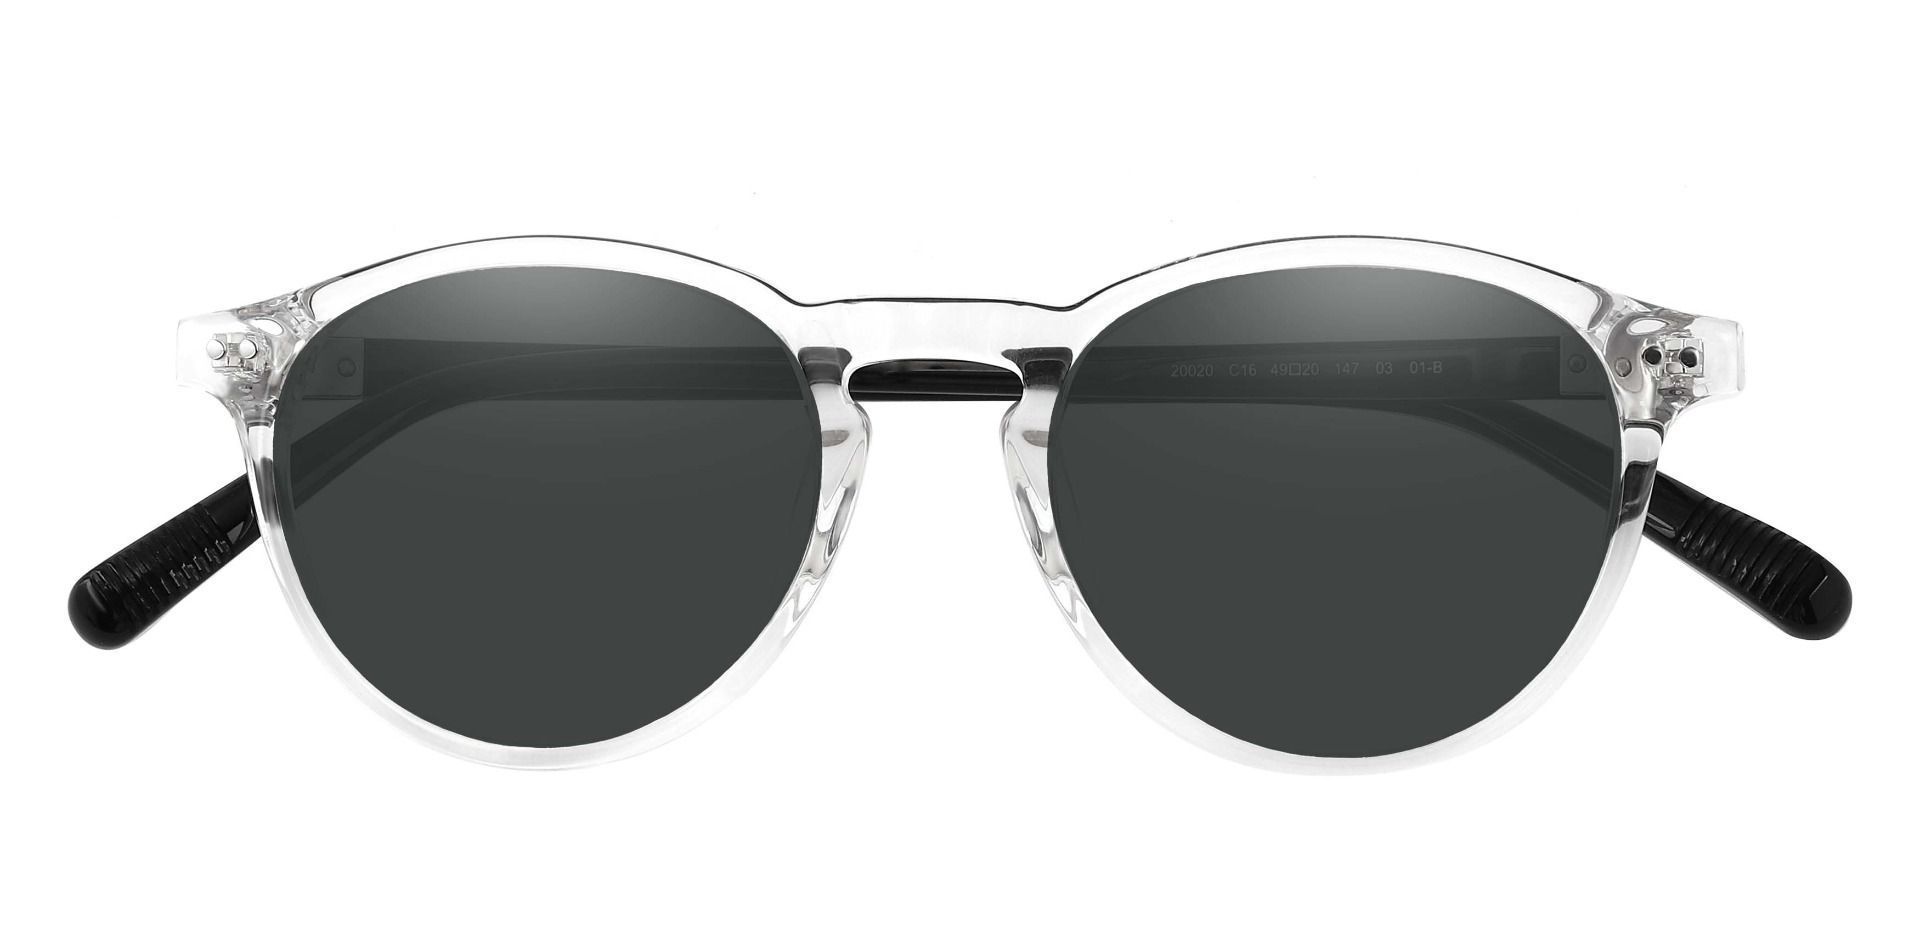 Monarch Oval Reading Sunglasses - Clear Frame With Gray Lenses